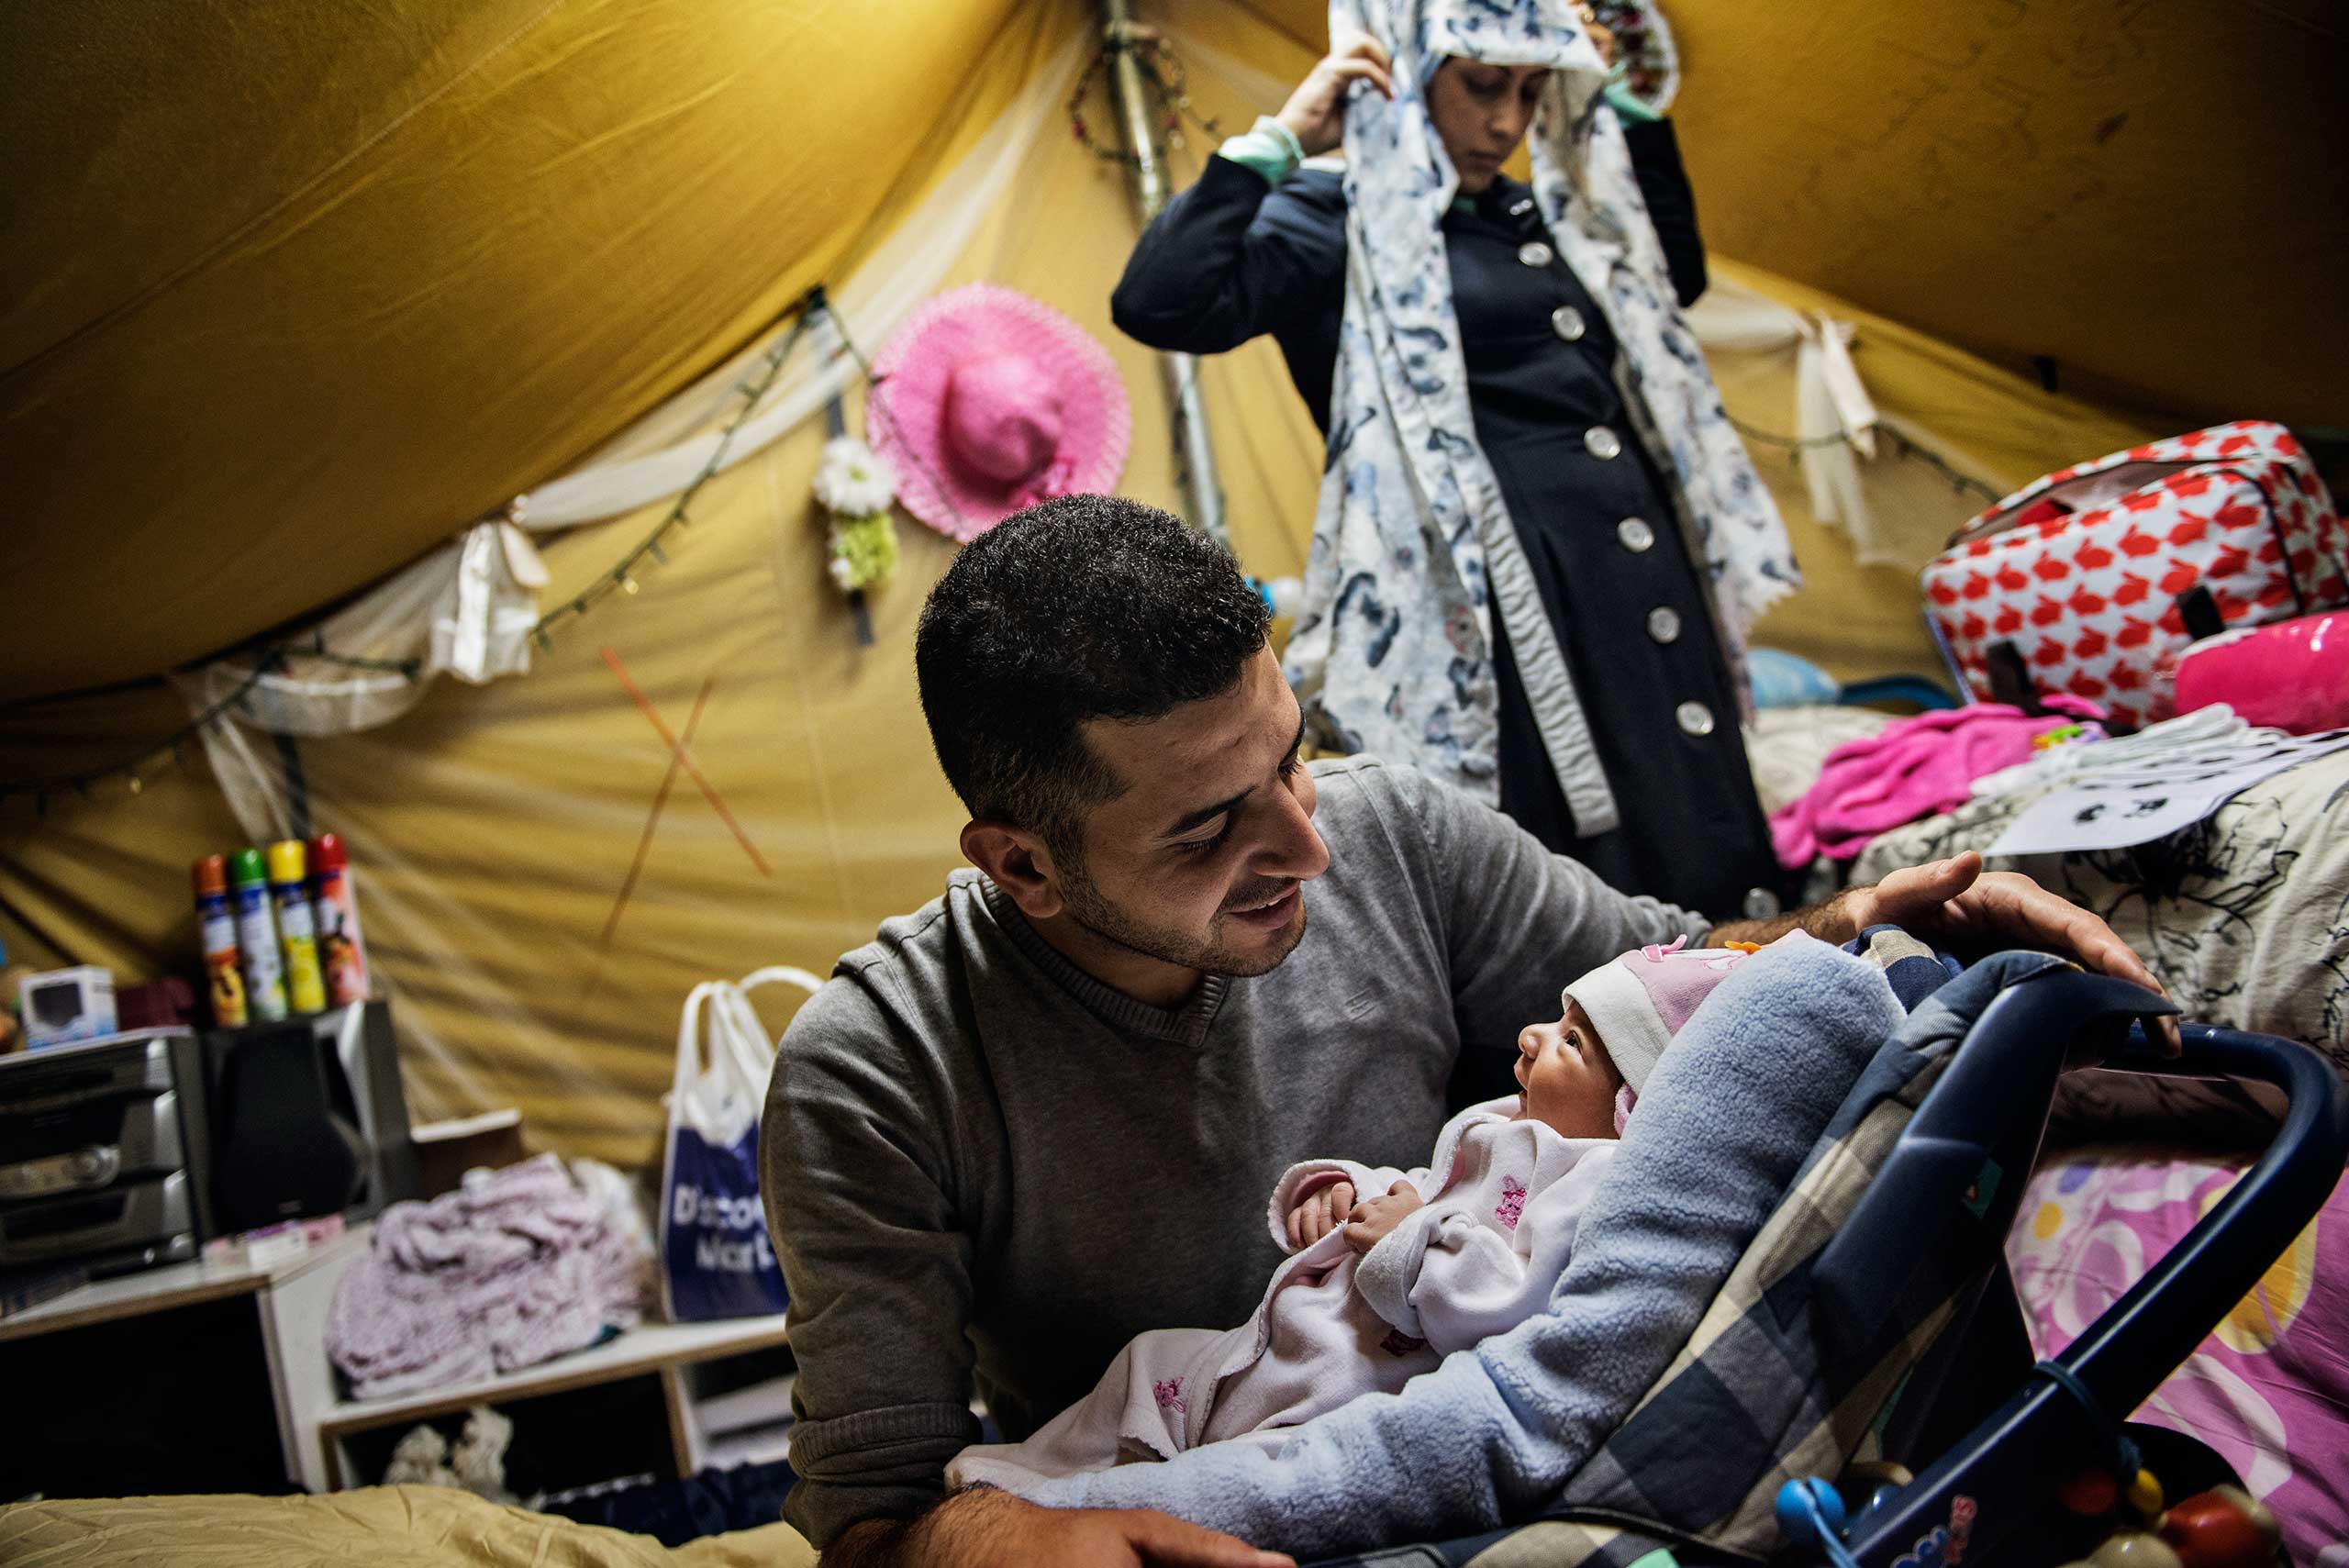 Yousef Alarsan holds his newborn baby daughter Rahaf, while his wife Nourelhuda, stands behind them in their tent in the  Oreokastro camp, Nov. 8, 2016.   In 2014, Yousef left school in Deir ez-Zor and moved to a small nearby town to escape induction in the Syrian Army.  Once ISIS took control of the town, fearing for his life, he and Nour married and left Syria. Rahaf was born on Nov. 1, 2016.